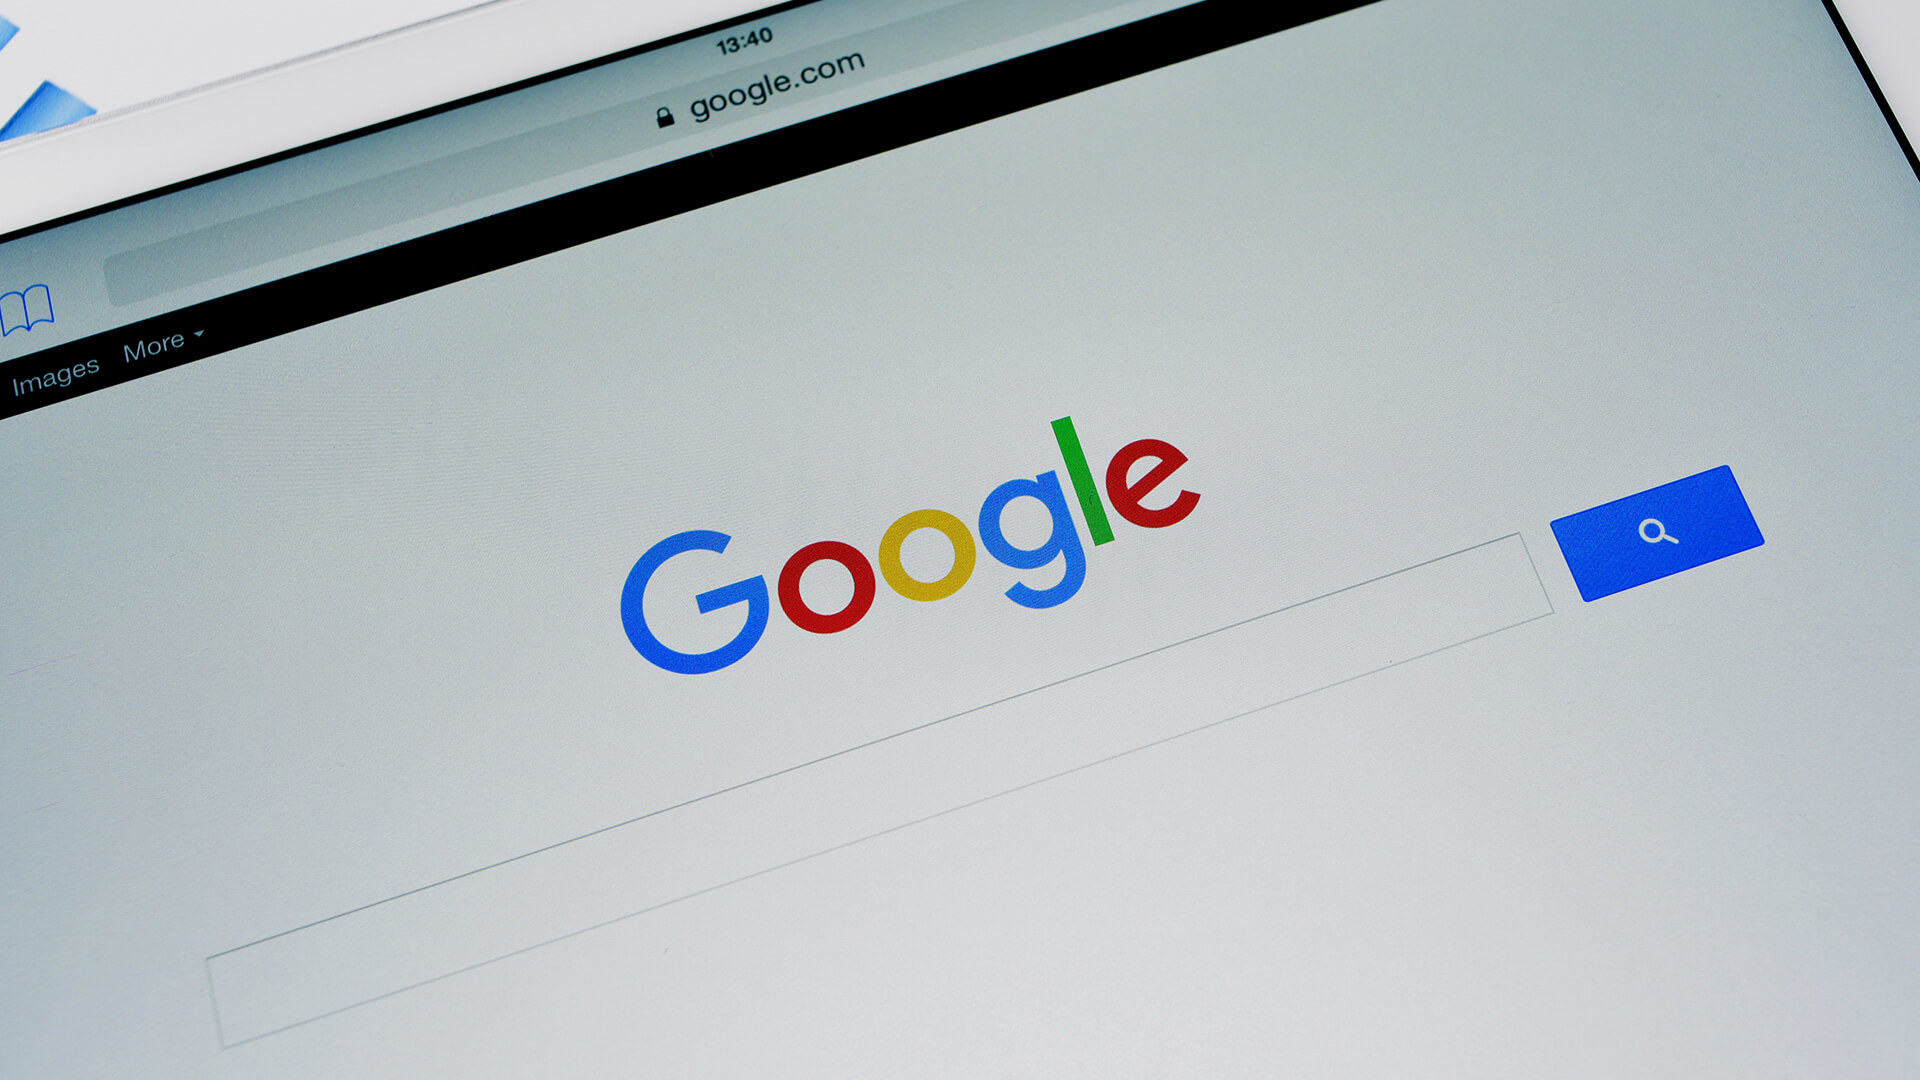 Google search update aims to show more diverse results from different domain names